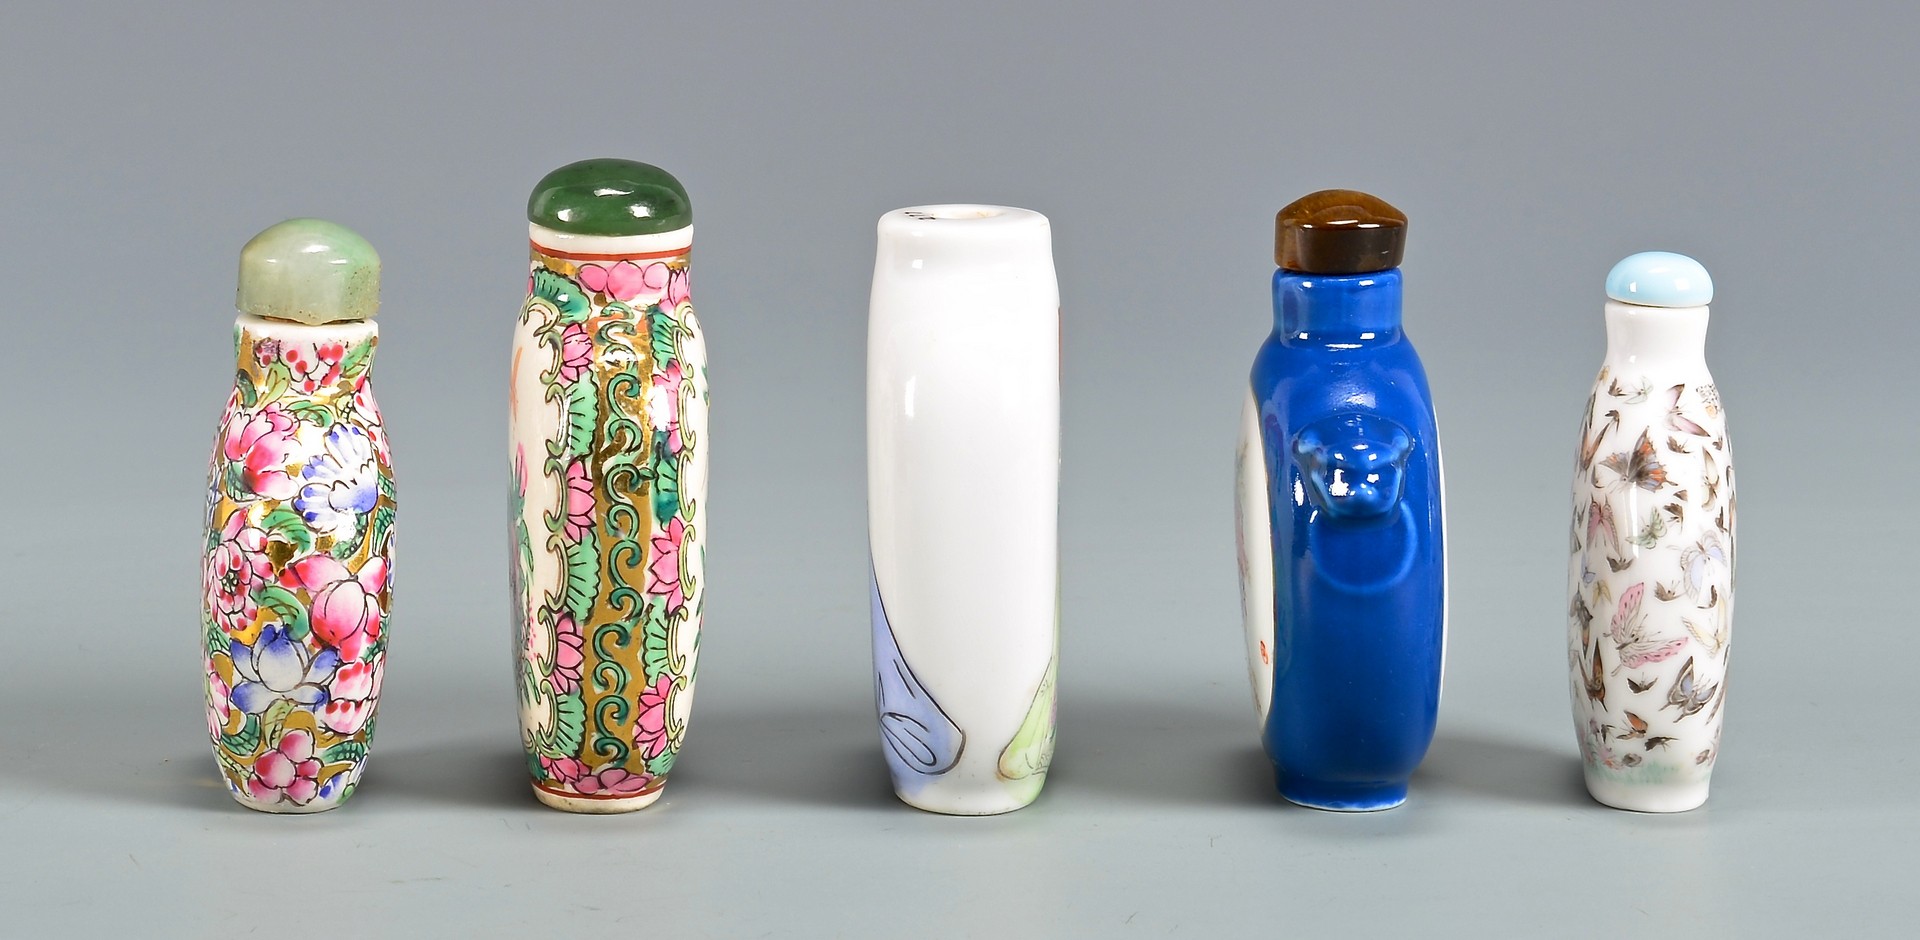 Lot 415: 5 Chinese Porcelain Snuff Bottles